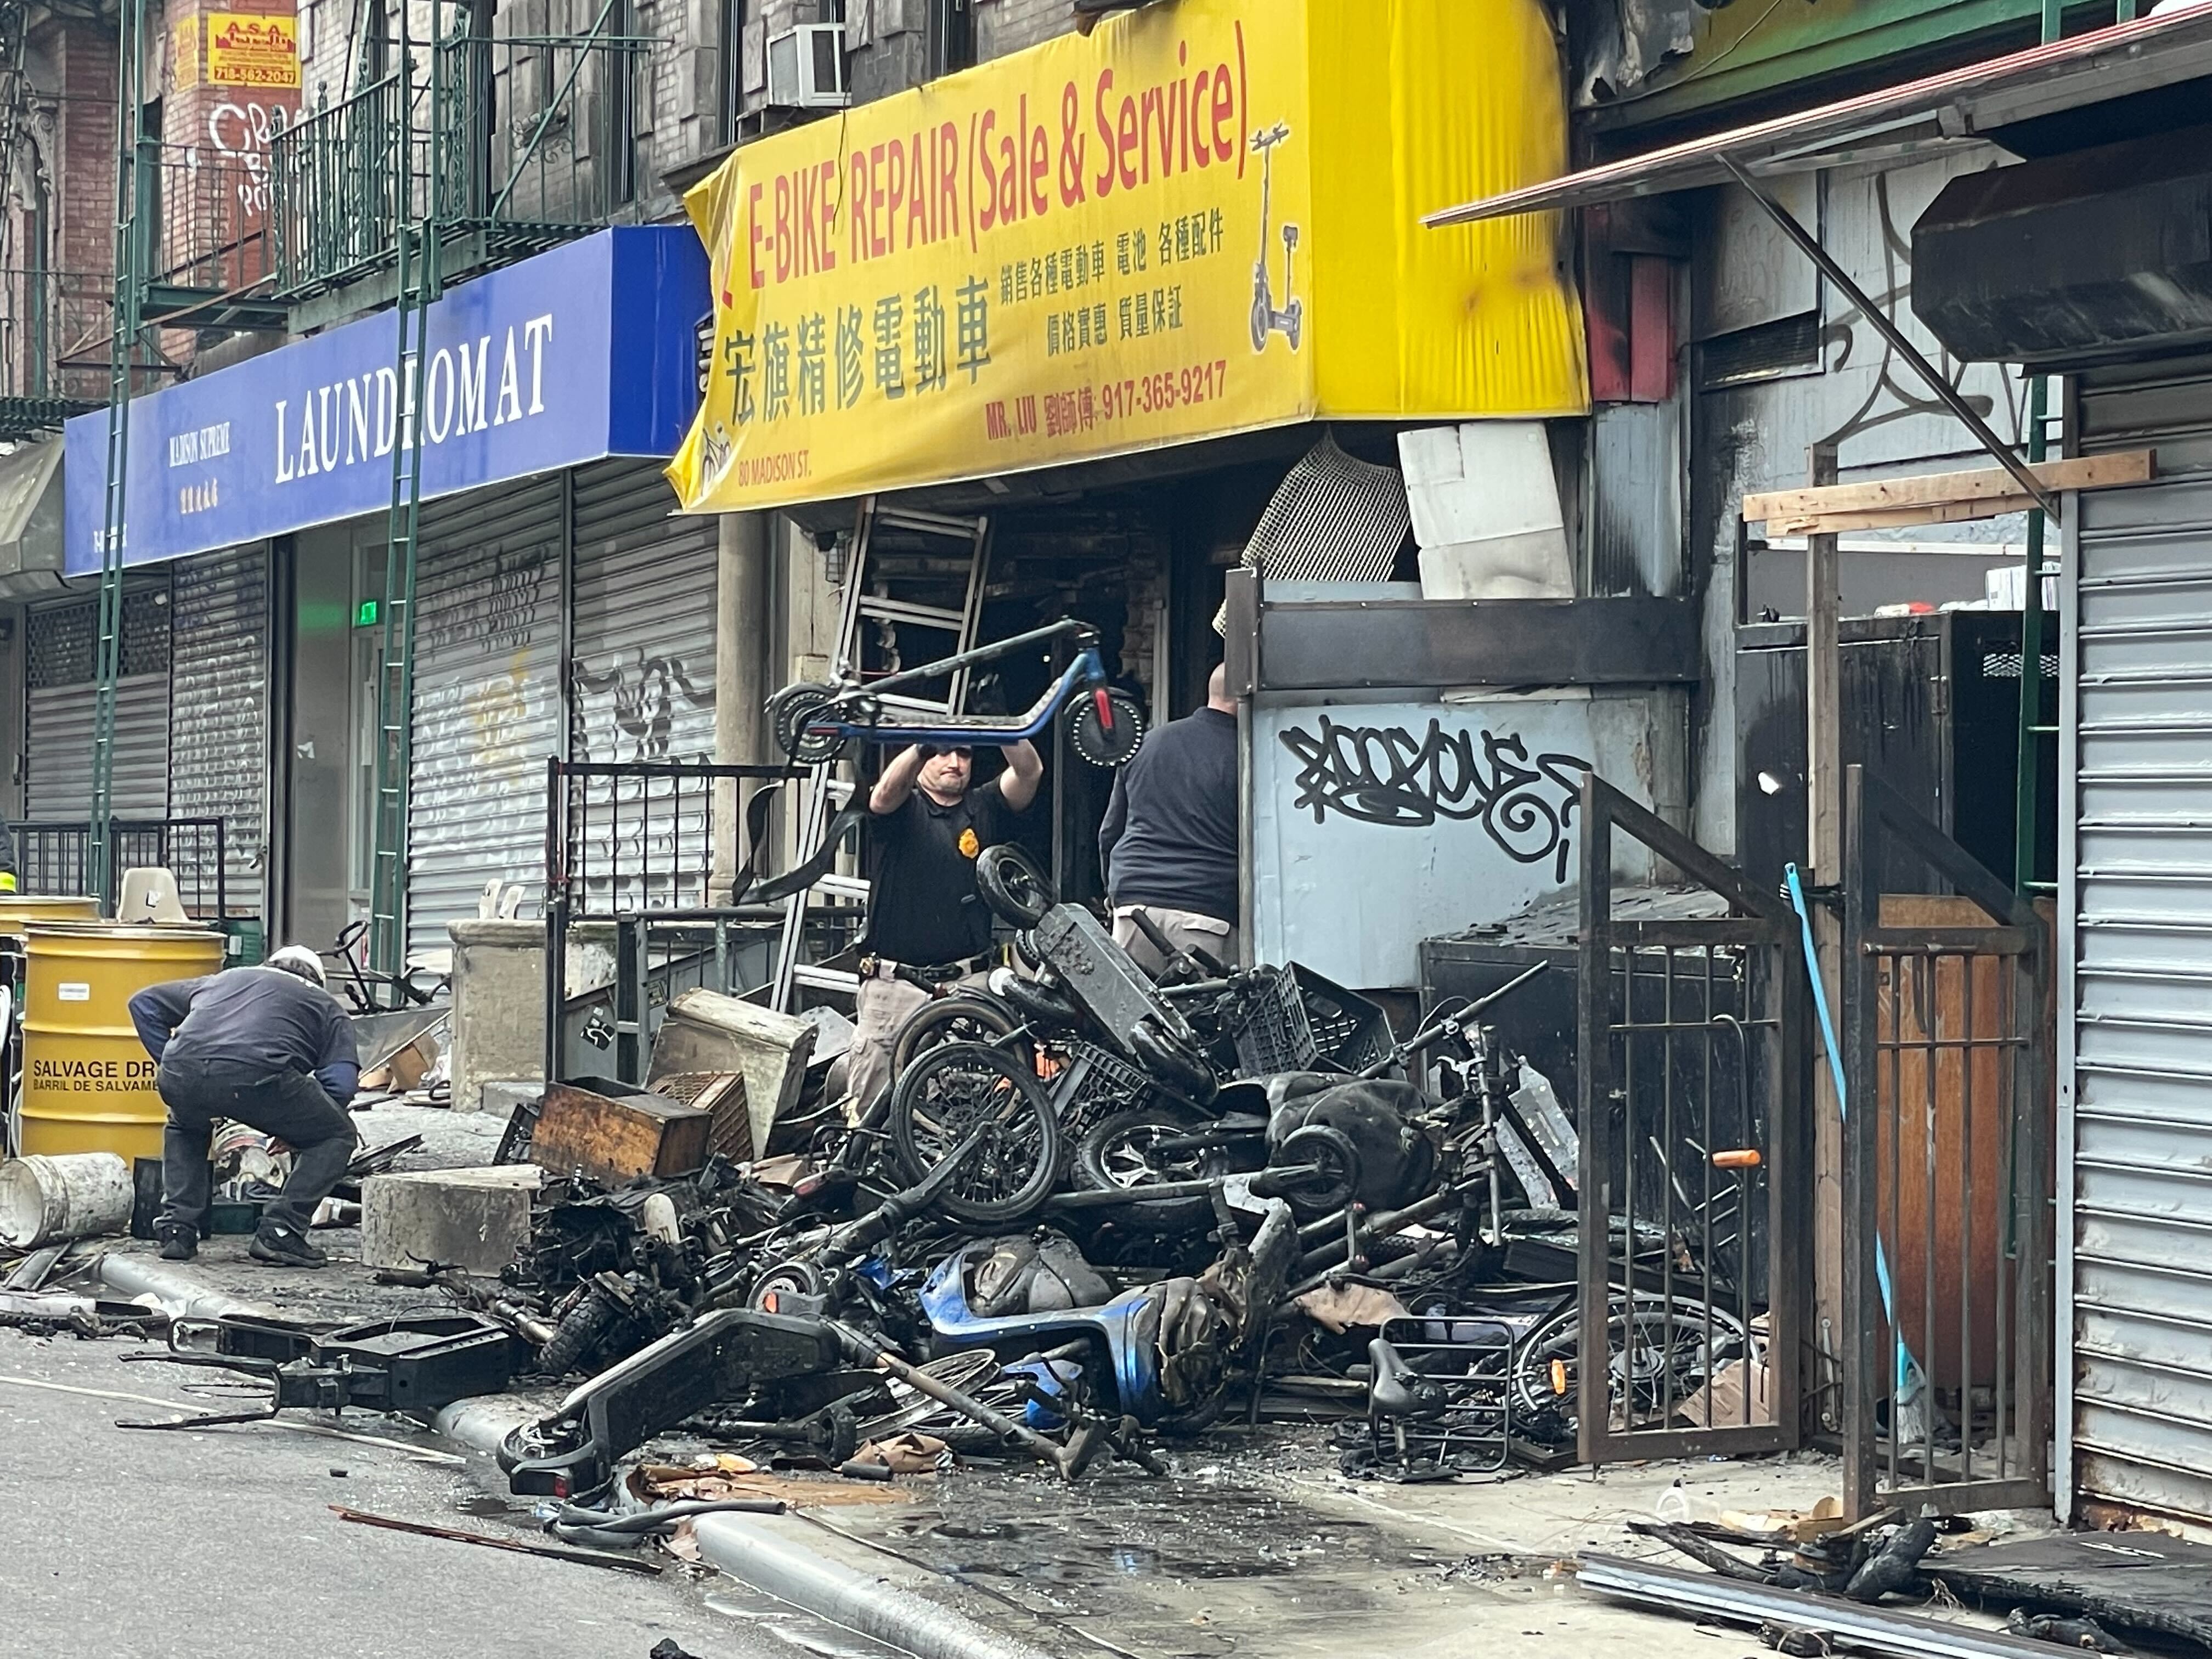 A photo of emergency workers sorting through the wreckage after a fire at an e-bike shop in Chinatown killed at least 4 people.